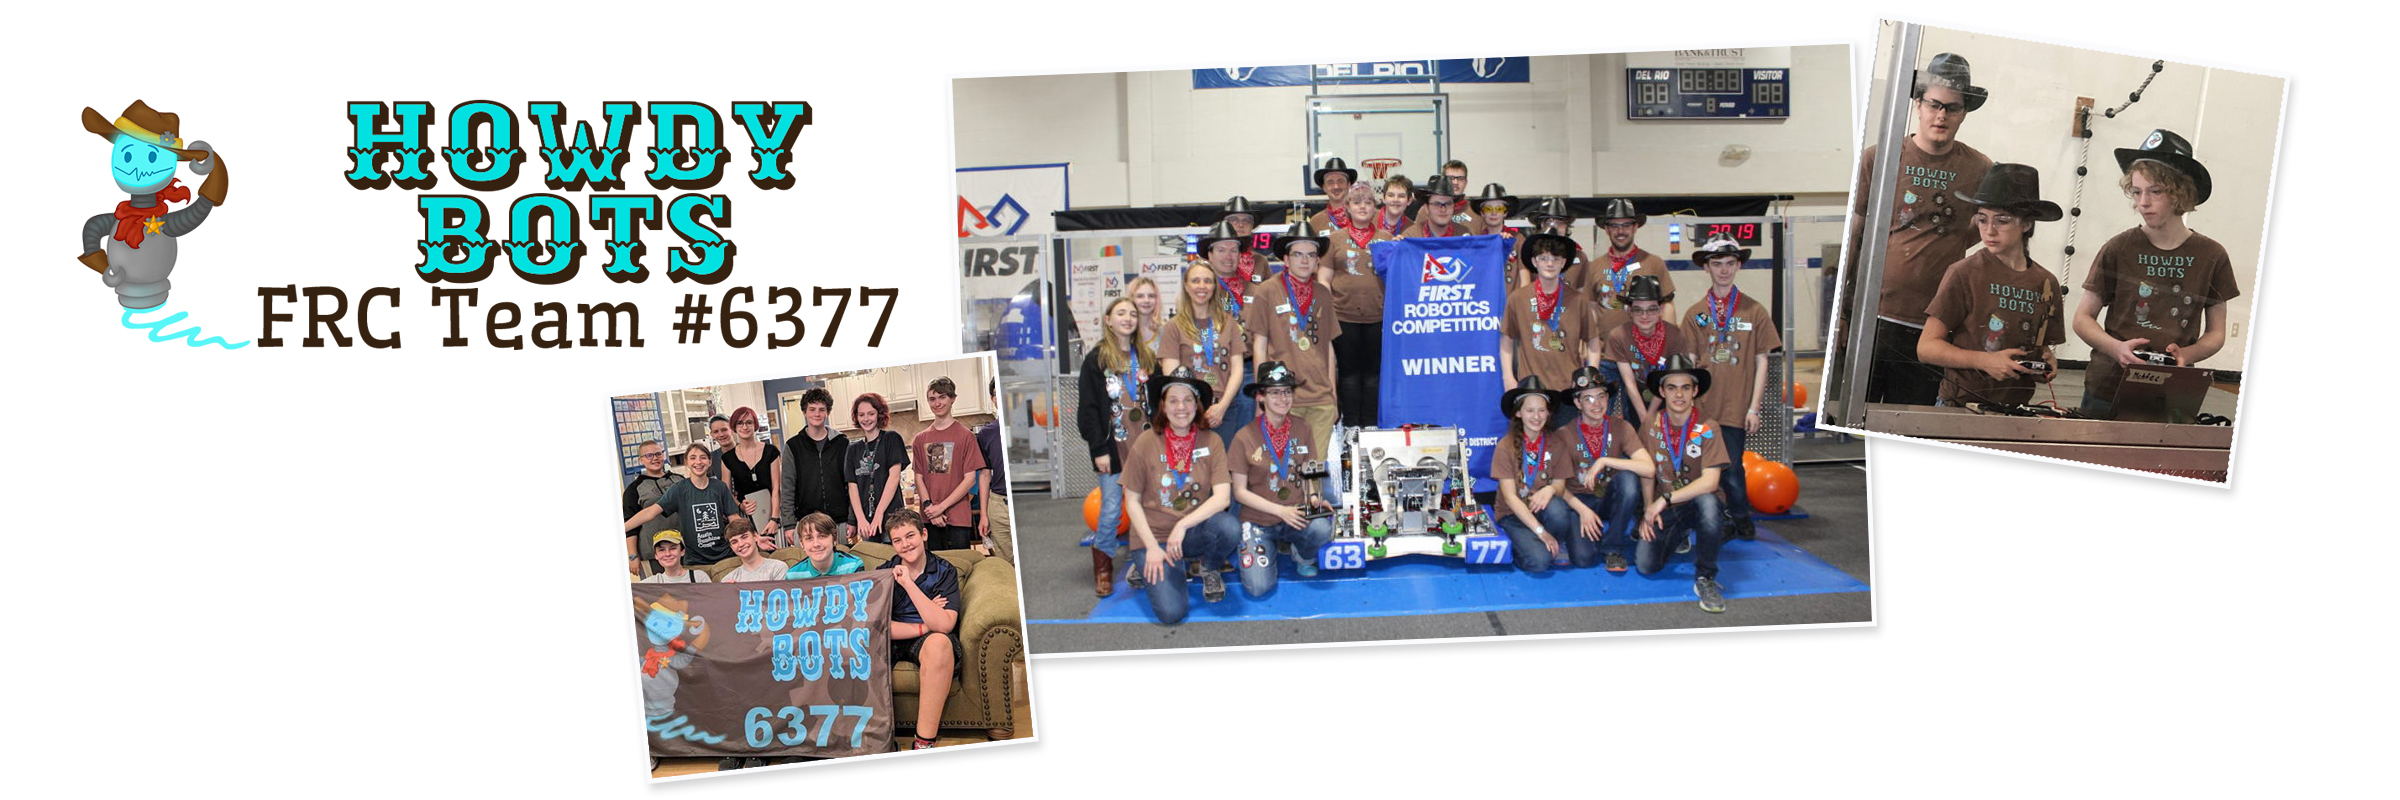 images of students on FRC team